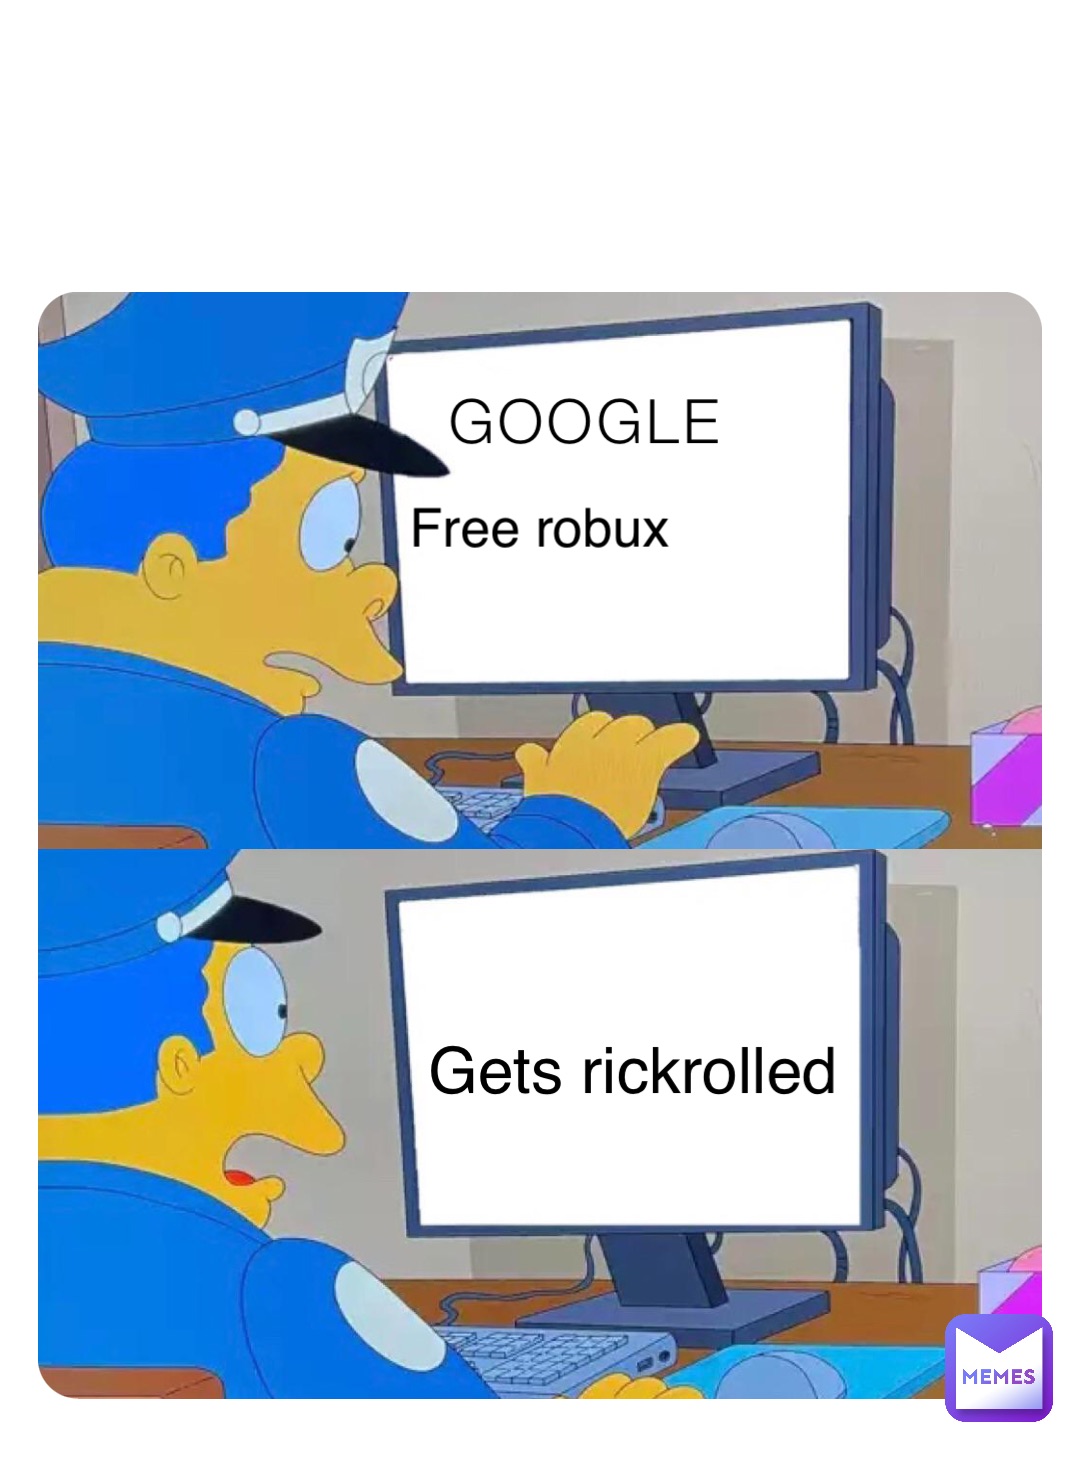 GOOGLE Free robux Gets rickrolled